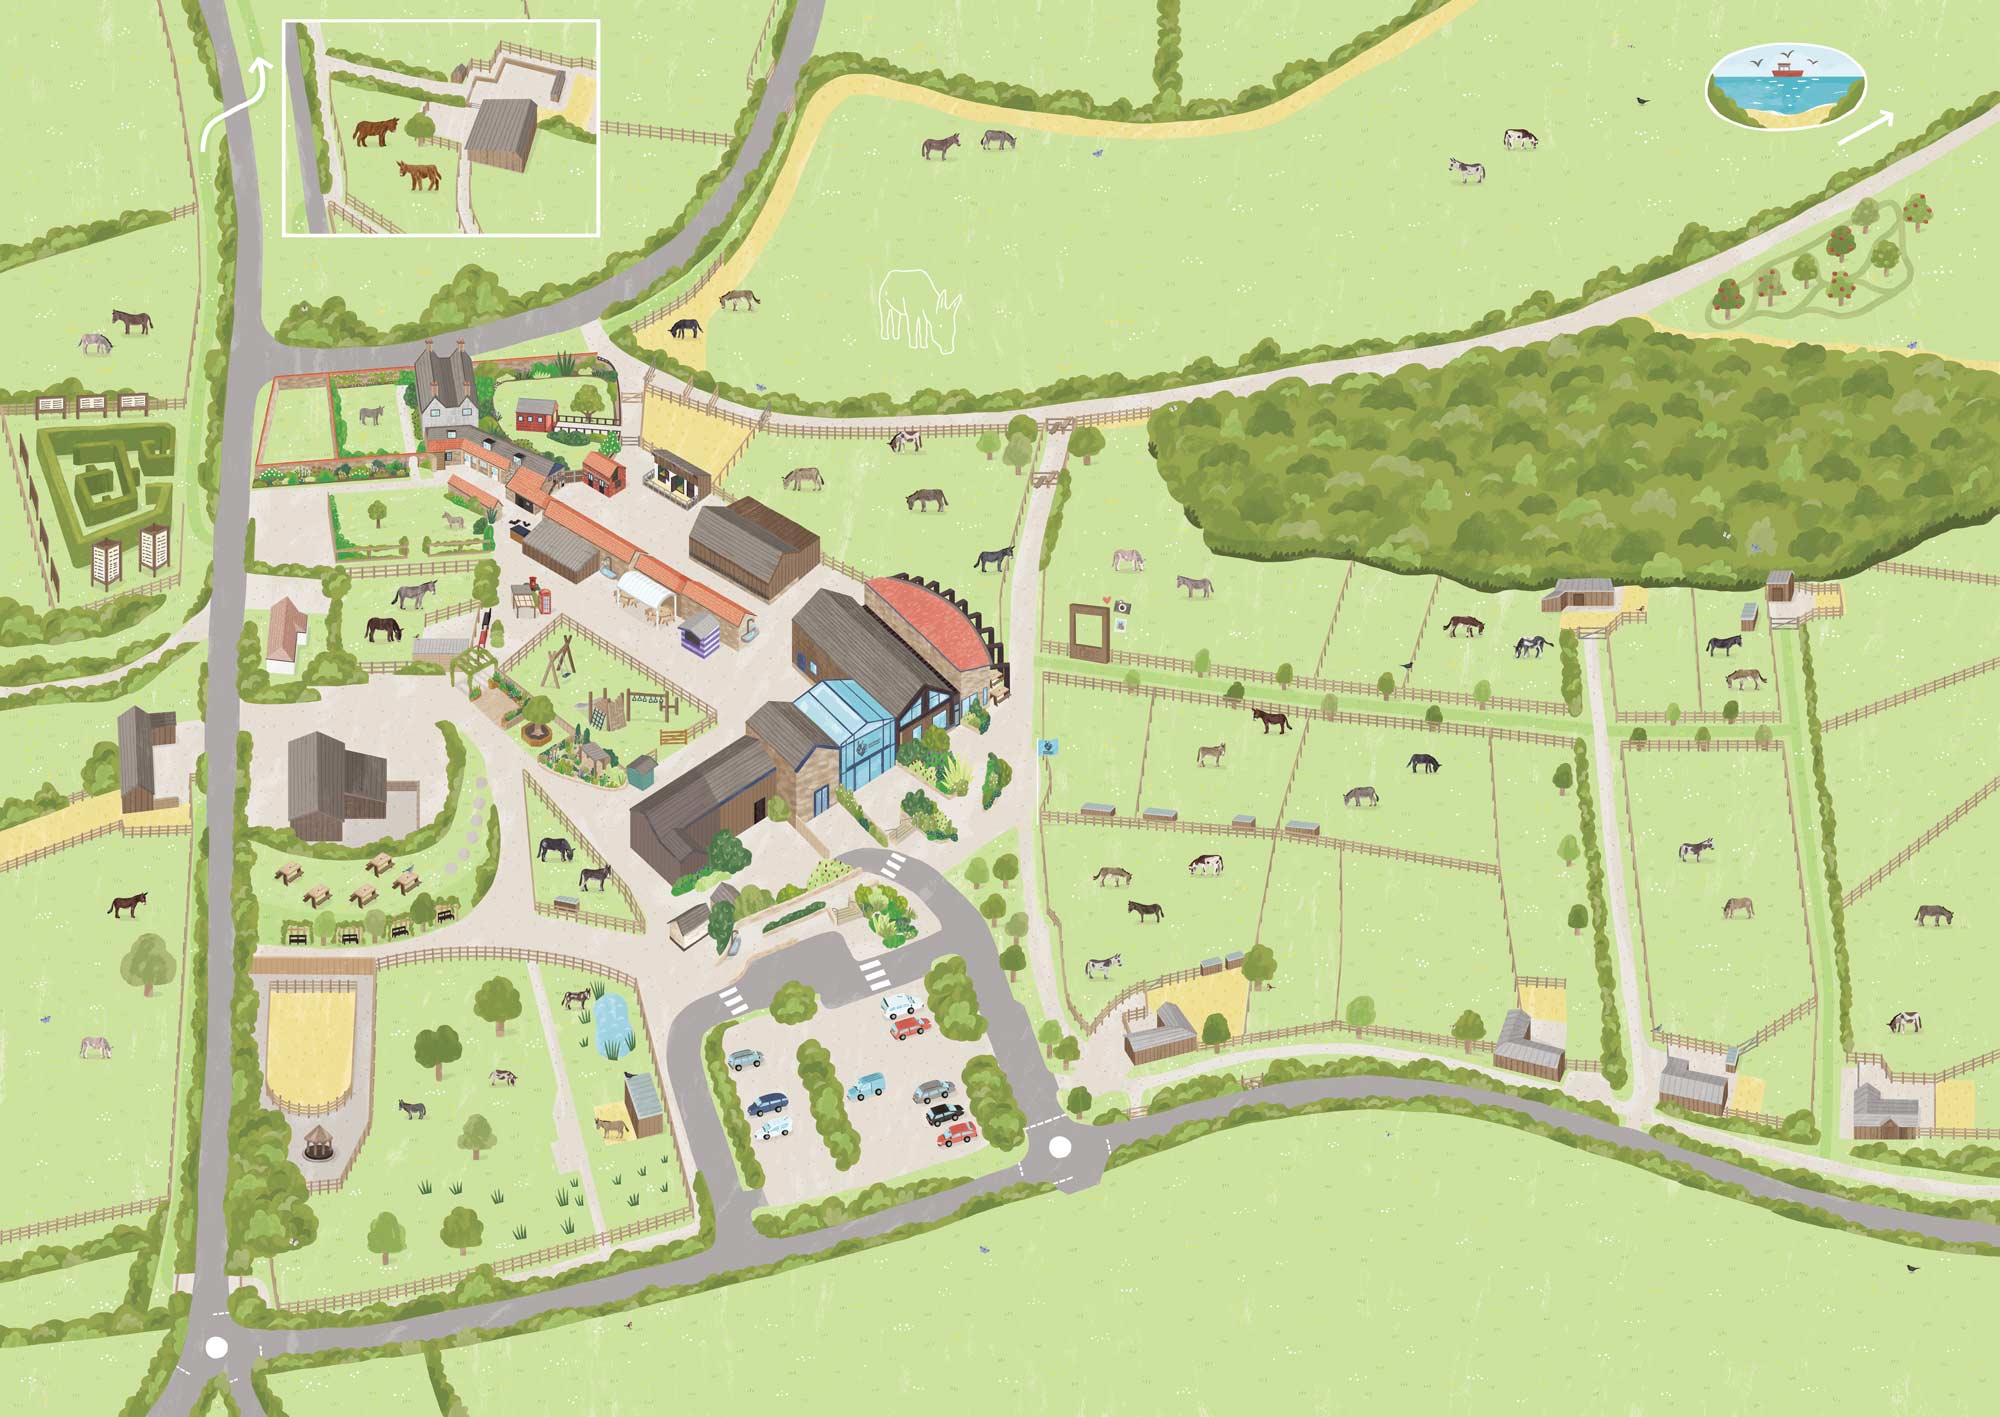 Map of the Donkey Sanctuary, Sidmouth, by Elly Jahnz